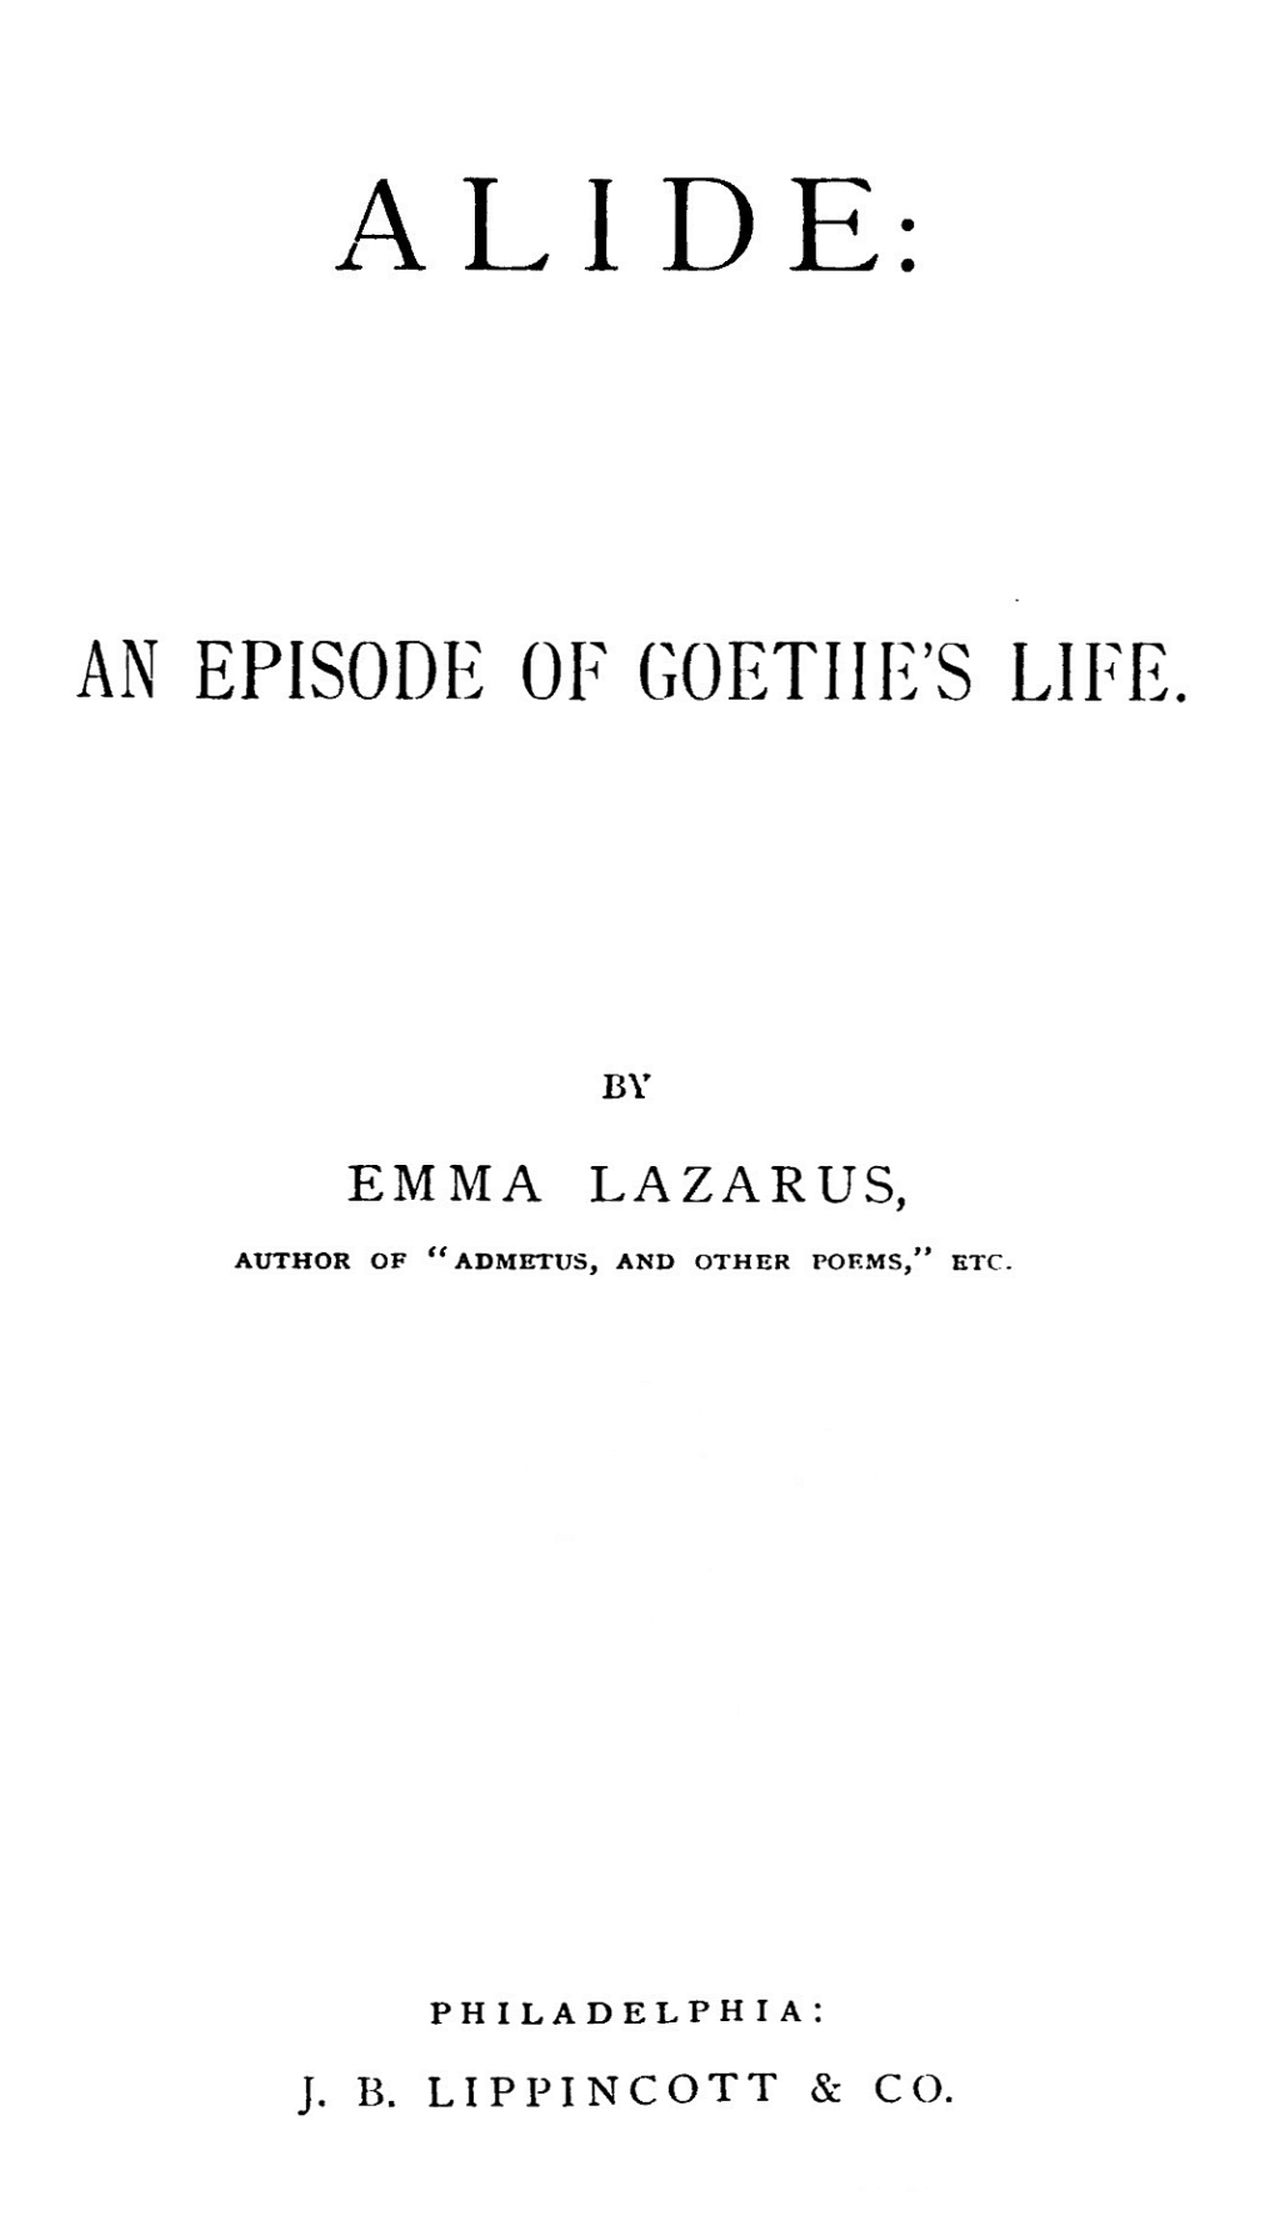 The Project Gutenberg eBook of Alide an episode of Goethes life by Emma Lazarus.